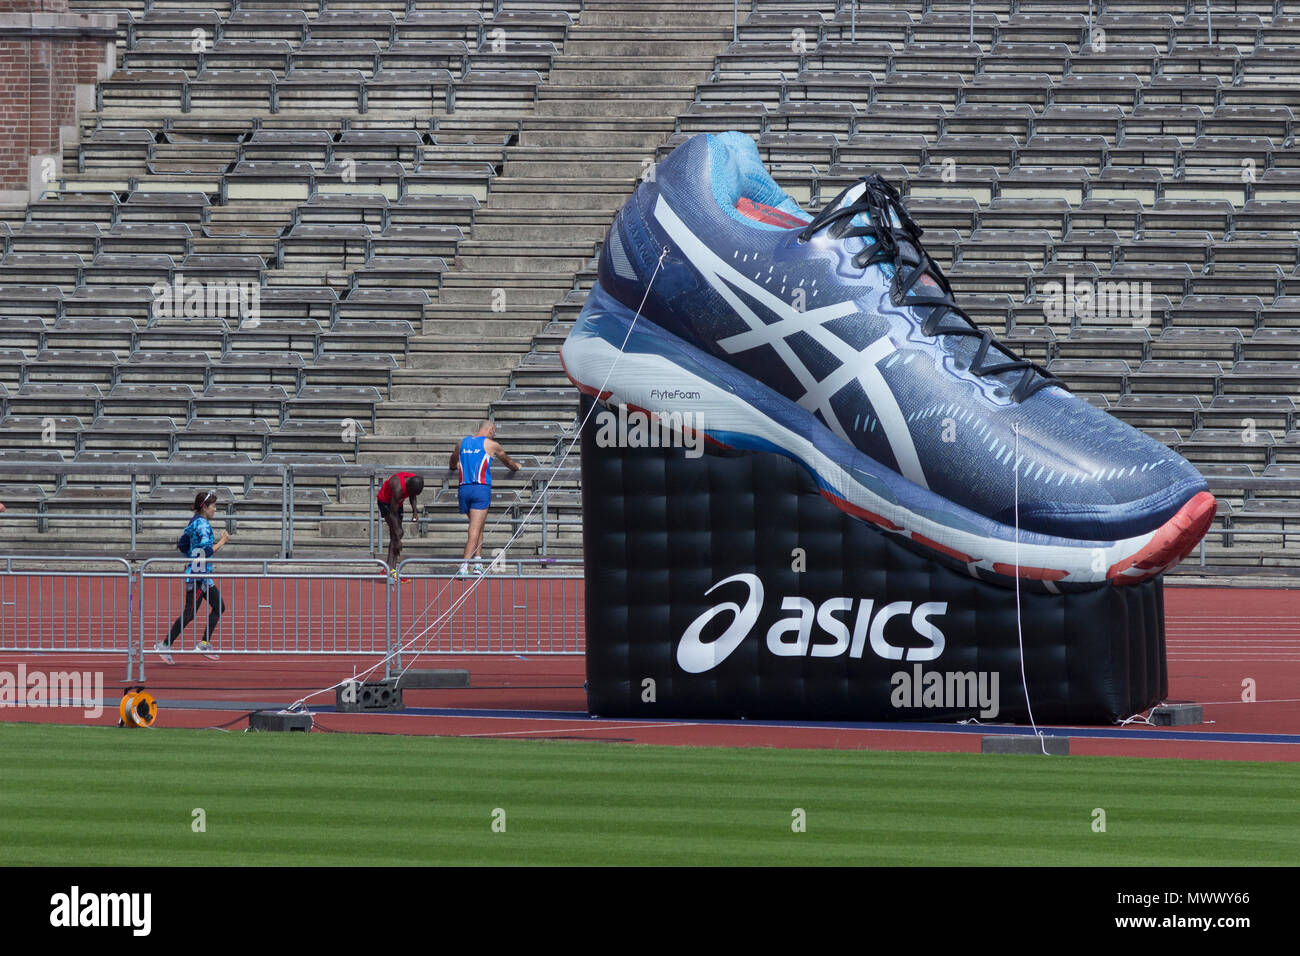 Asics High Resolution Stock Photography and Images - Alamy